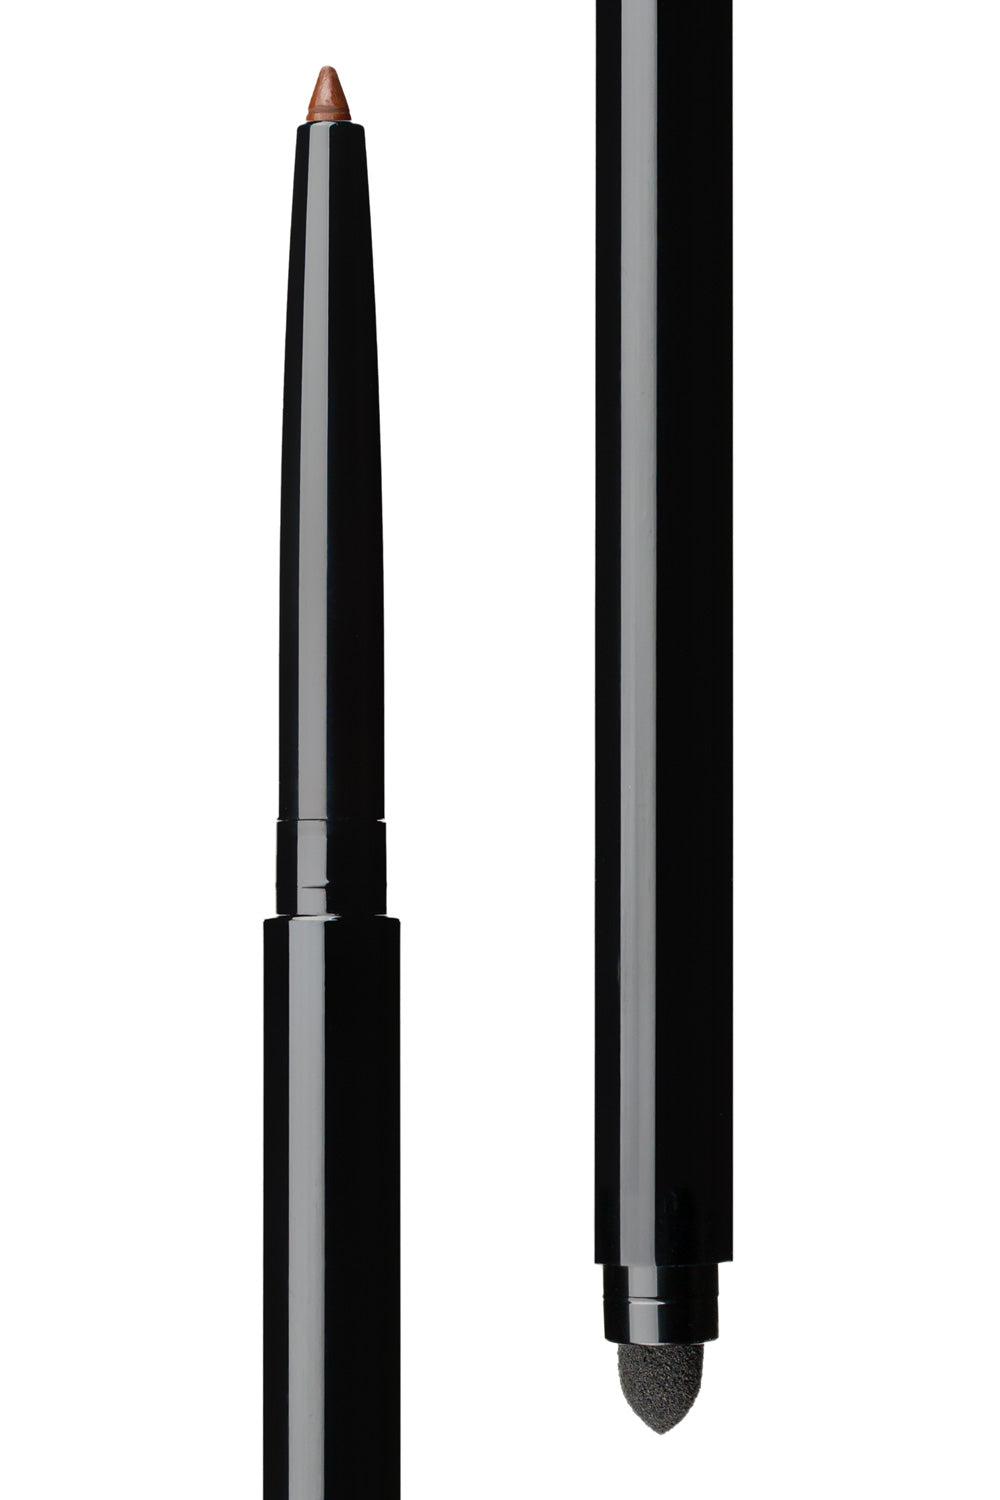 Brown - Retractable Eye Liner with Smudger